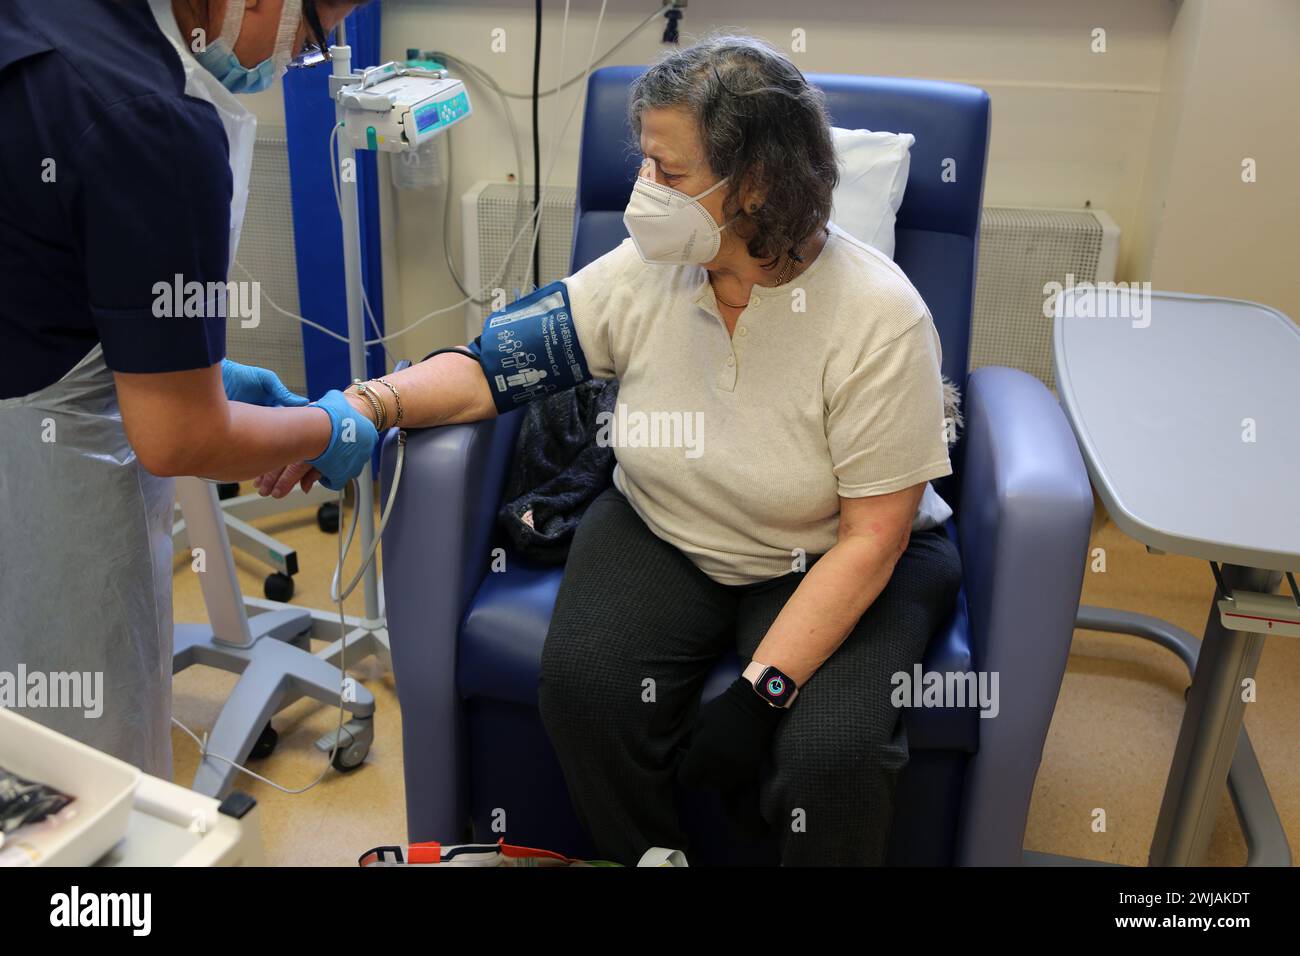 Nurse Using Blood Pressure Cuff on Patient before Administering an Iron Infusion At Hospital Surrey England Stock Photo